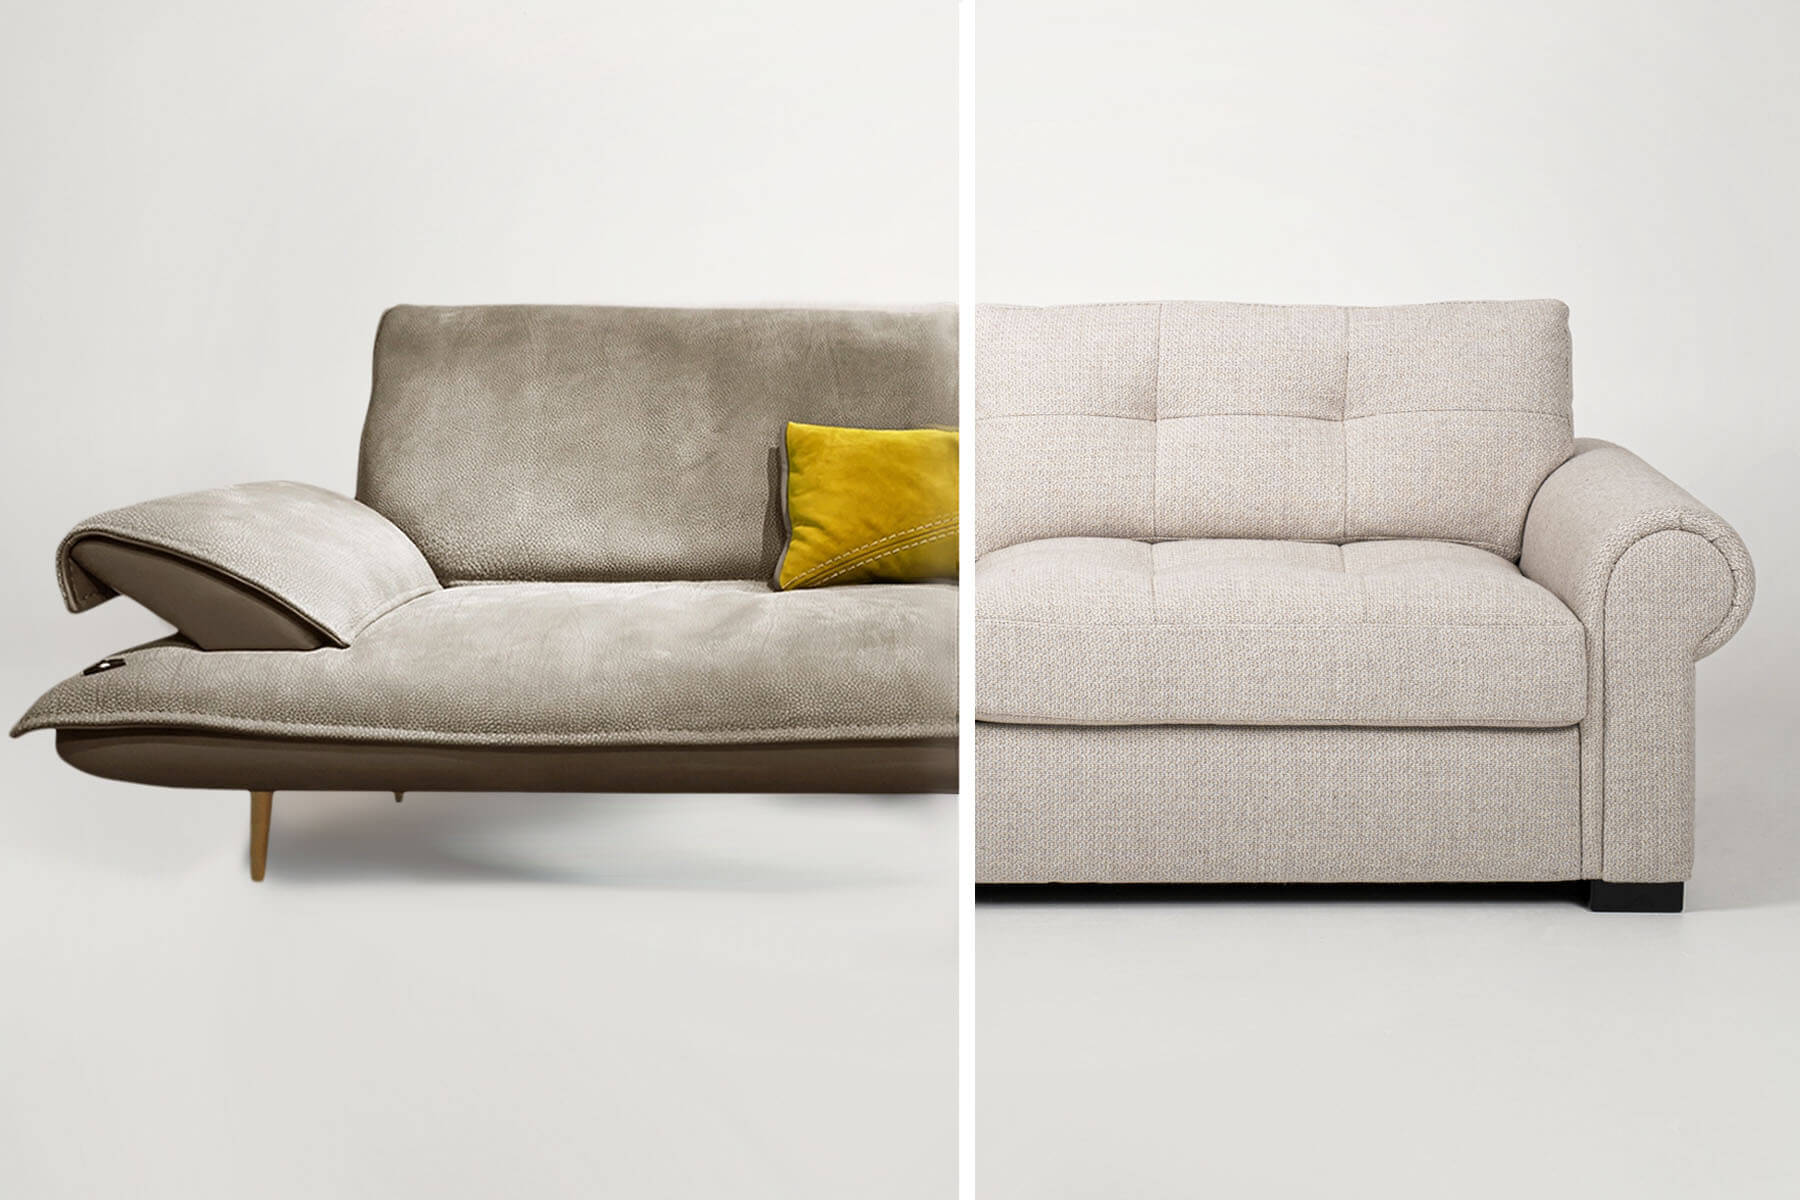 difference between couch and sofa bed